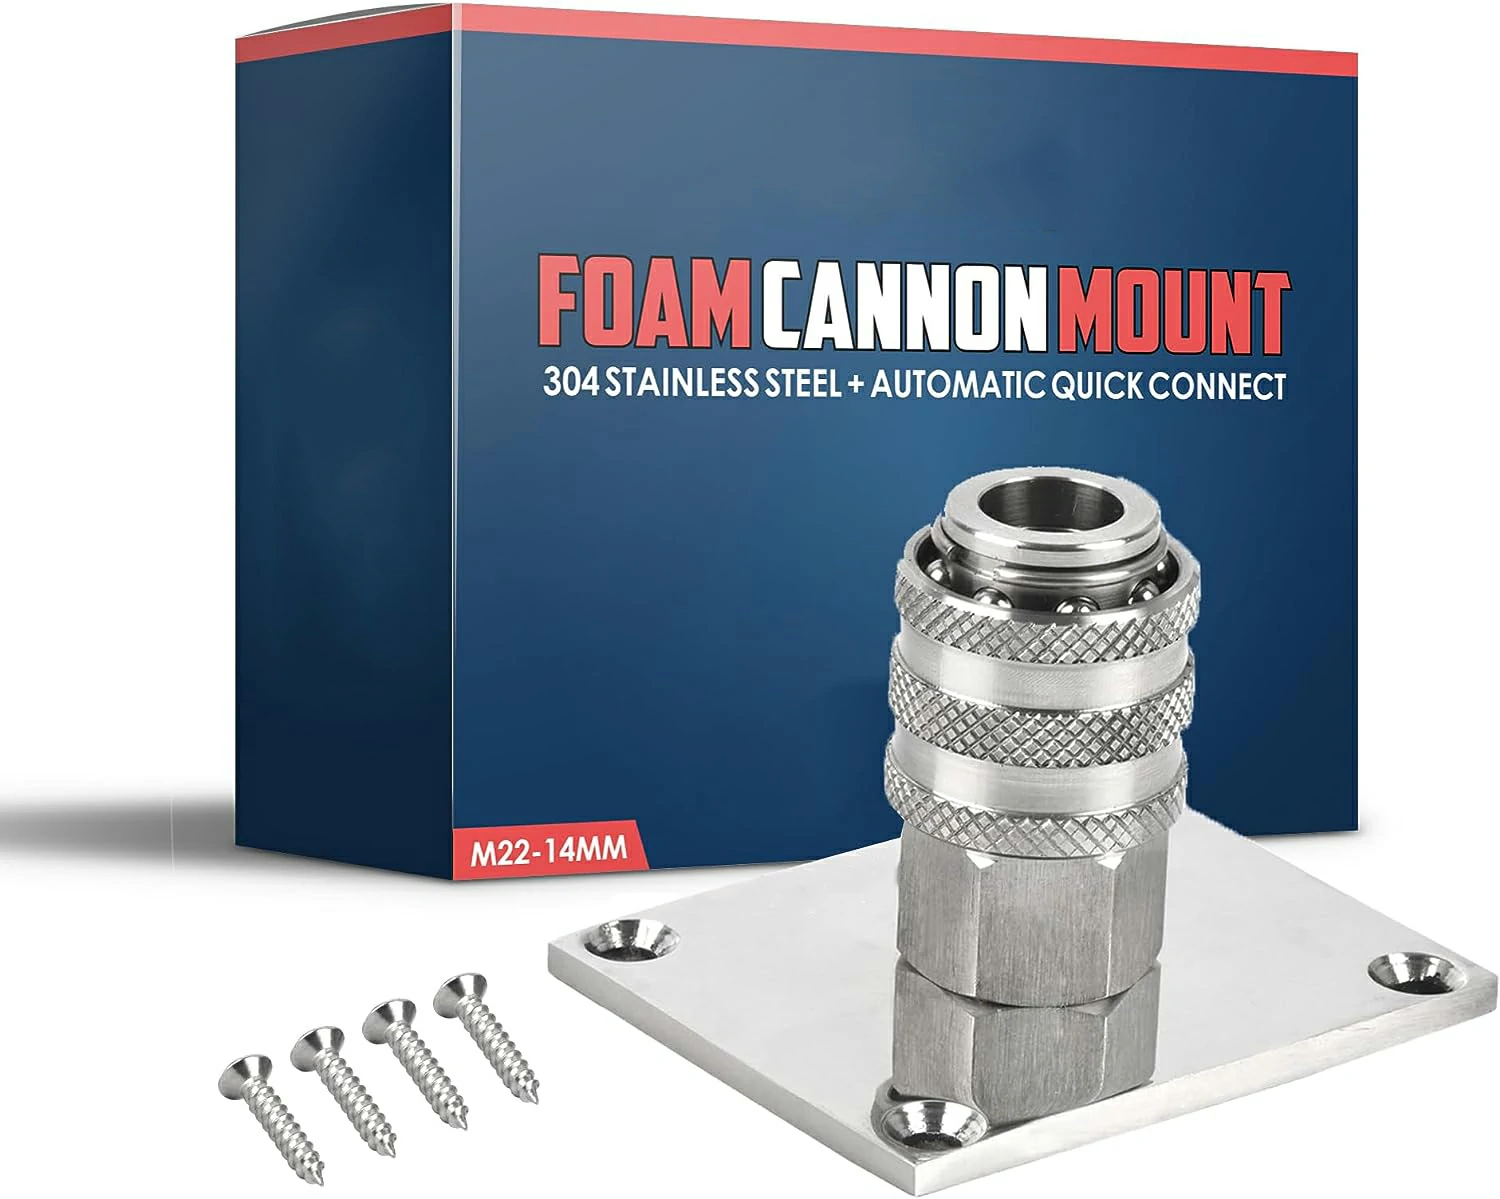 EVEAGE Automatic Foam Cannon Mount Machined in 304 Stainless Steel